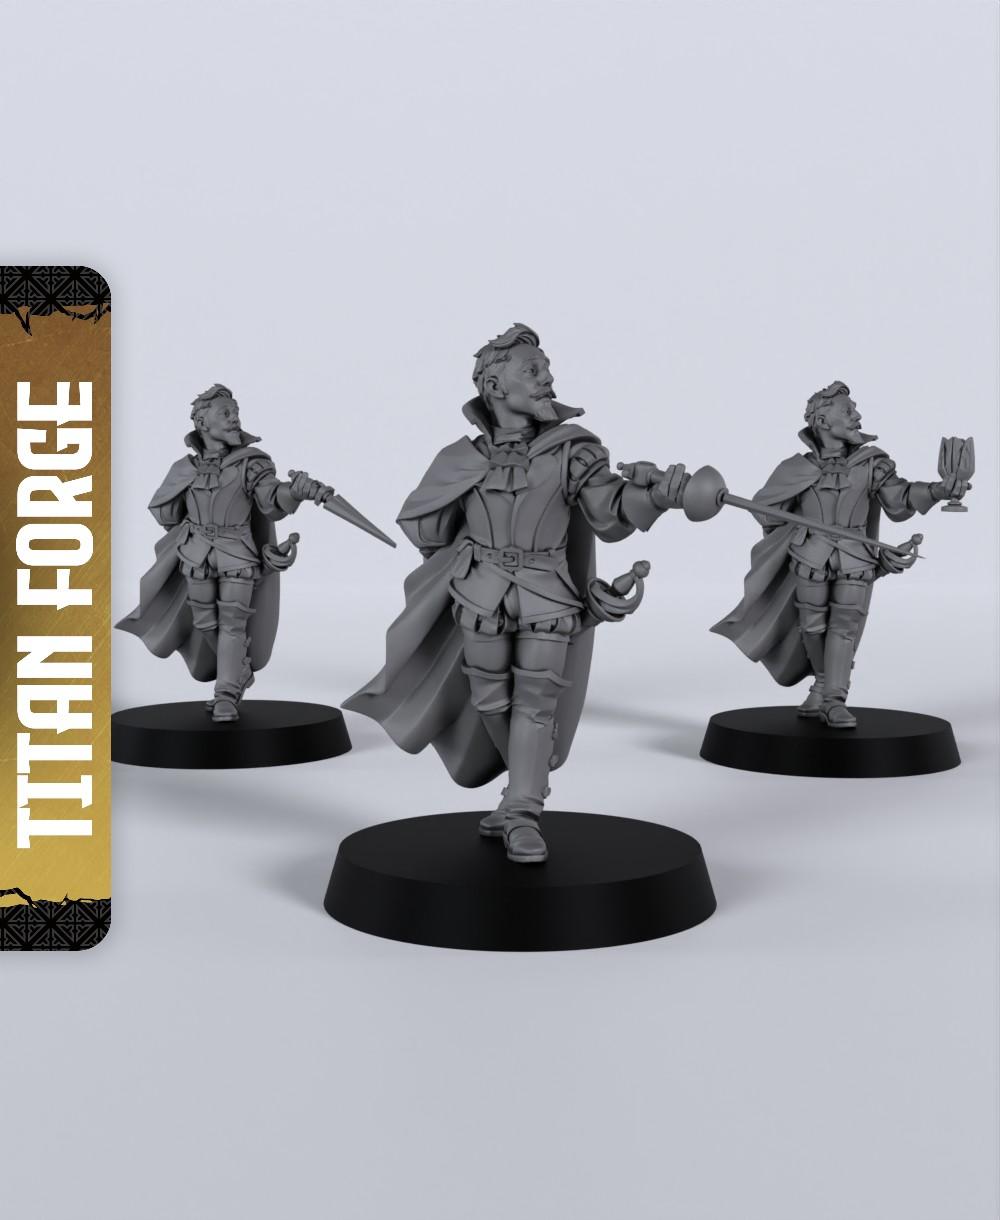 Human Rogue - With Free Dragon Warhammer - 5e DnD Inspired for RPG and Wargamers 3d model